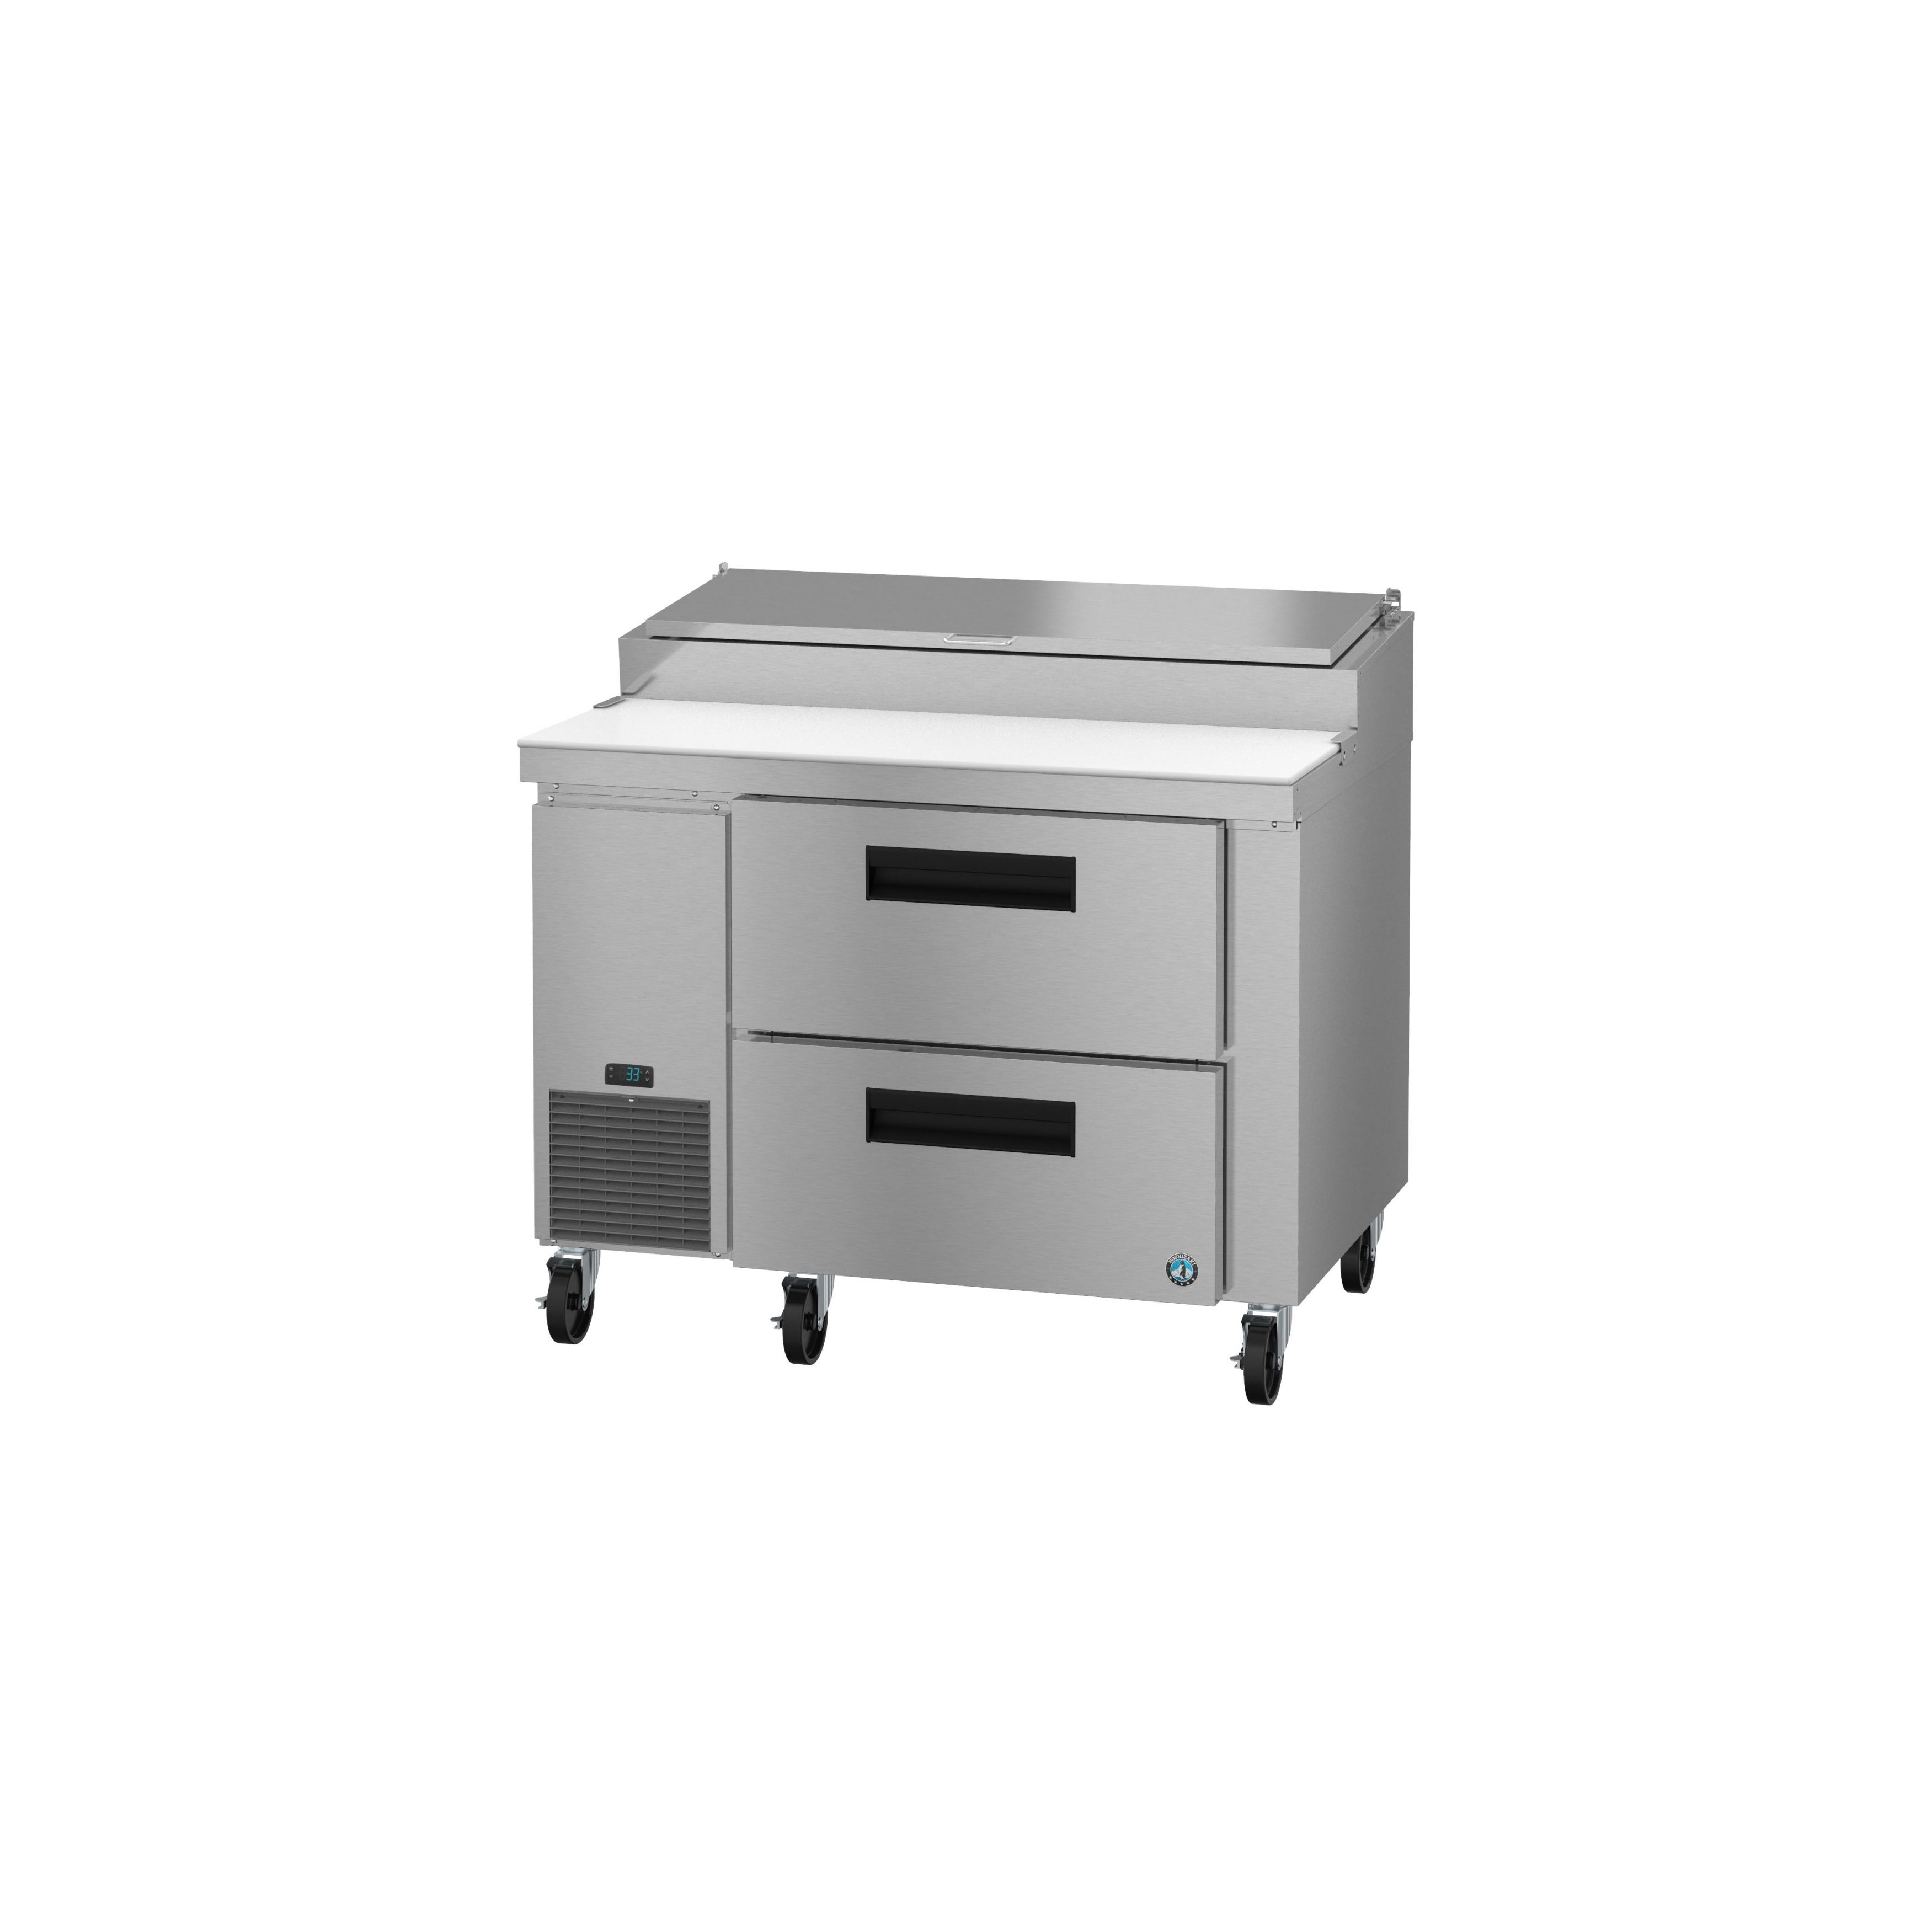 Hoshizaki - PR46B-D2, Commercial Single Section Pizza Prep Table Refrigerator Stainless Drawers 11.23cu.ft.